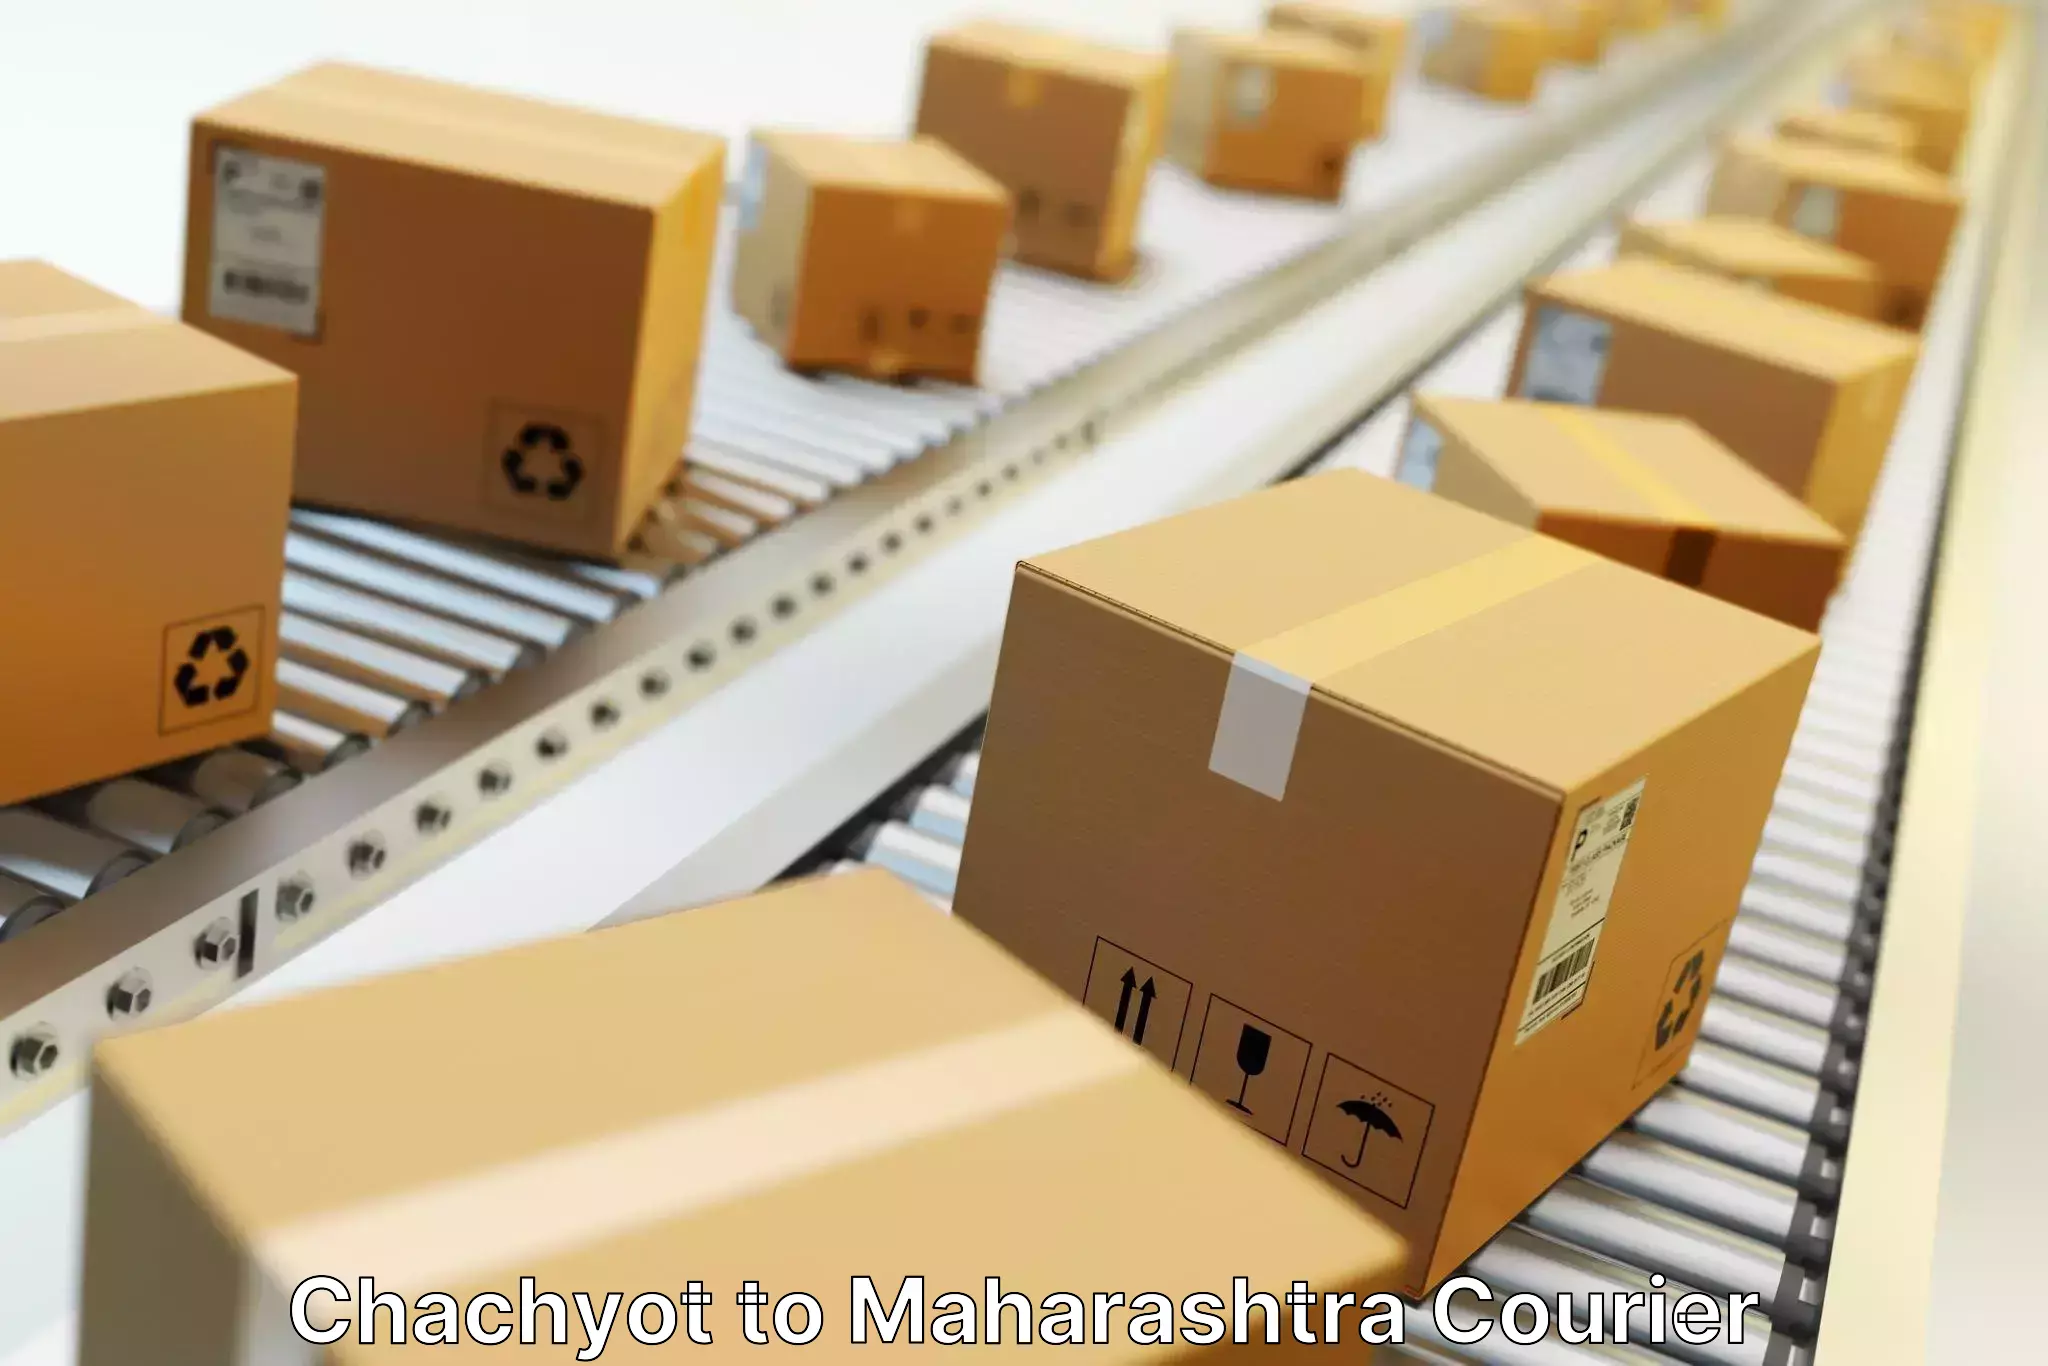 Professional parcel services in Chachyot to Kalyan Dombivli